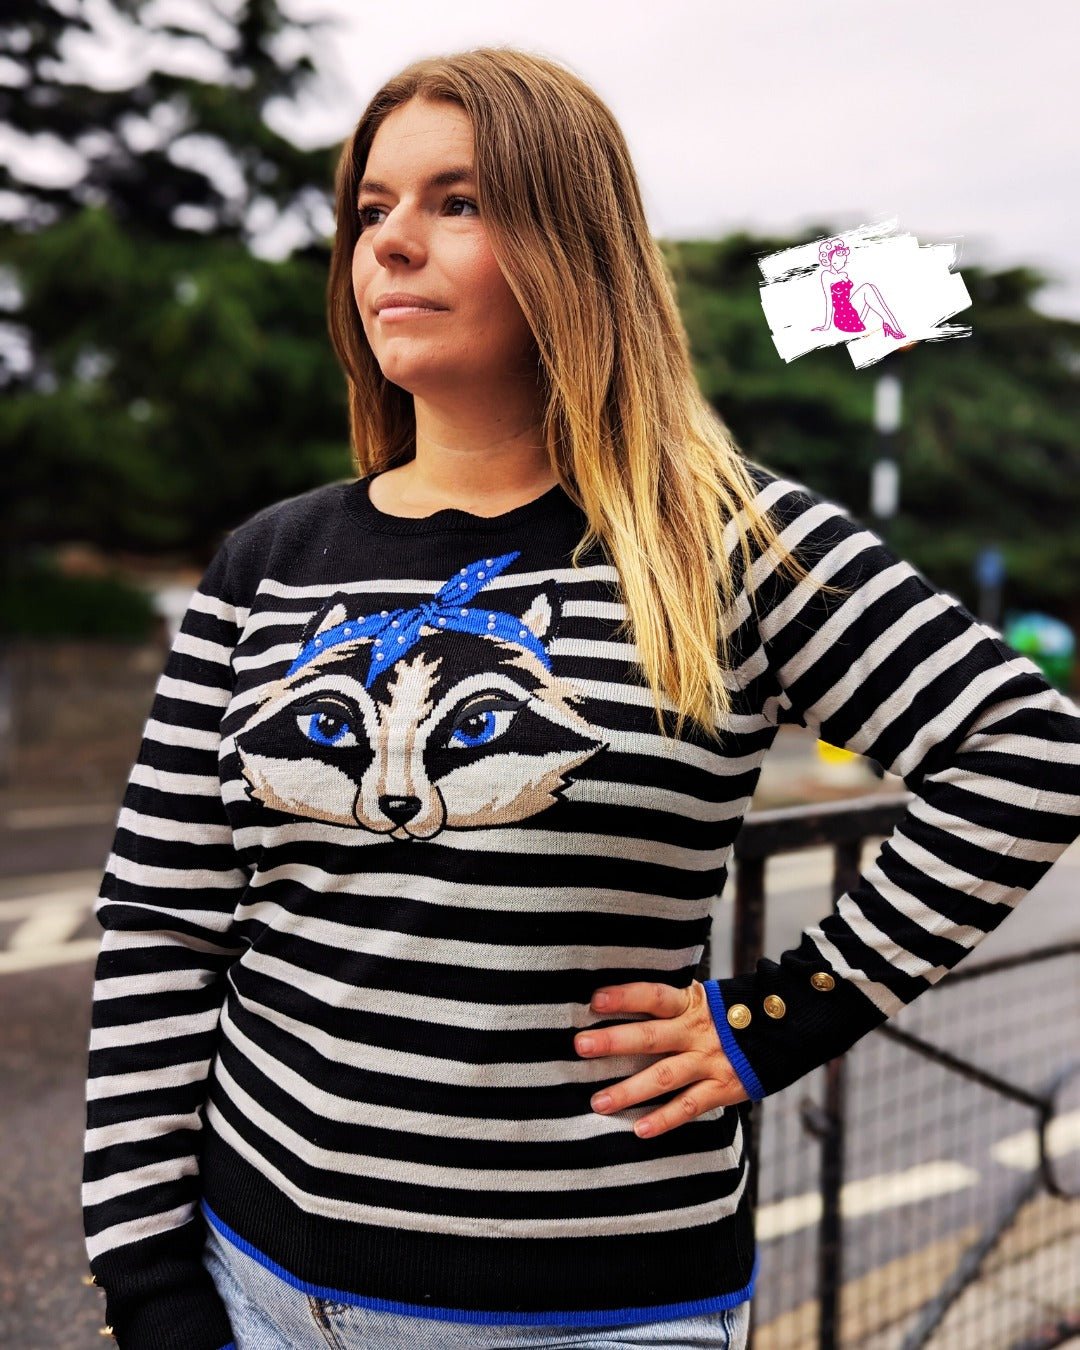 Curiously Cute Racoon Jumper - Rockamilly-Jumpers & Cardigans-Vintage